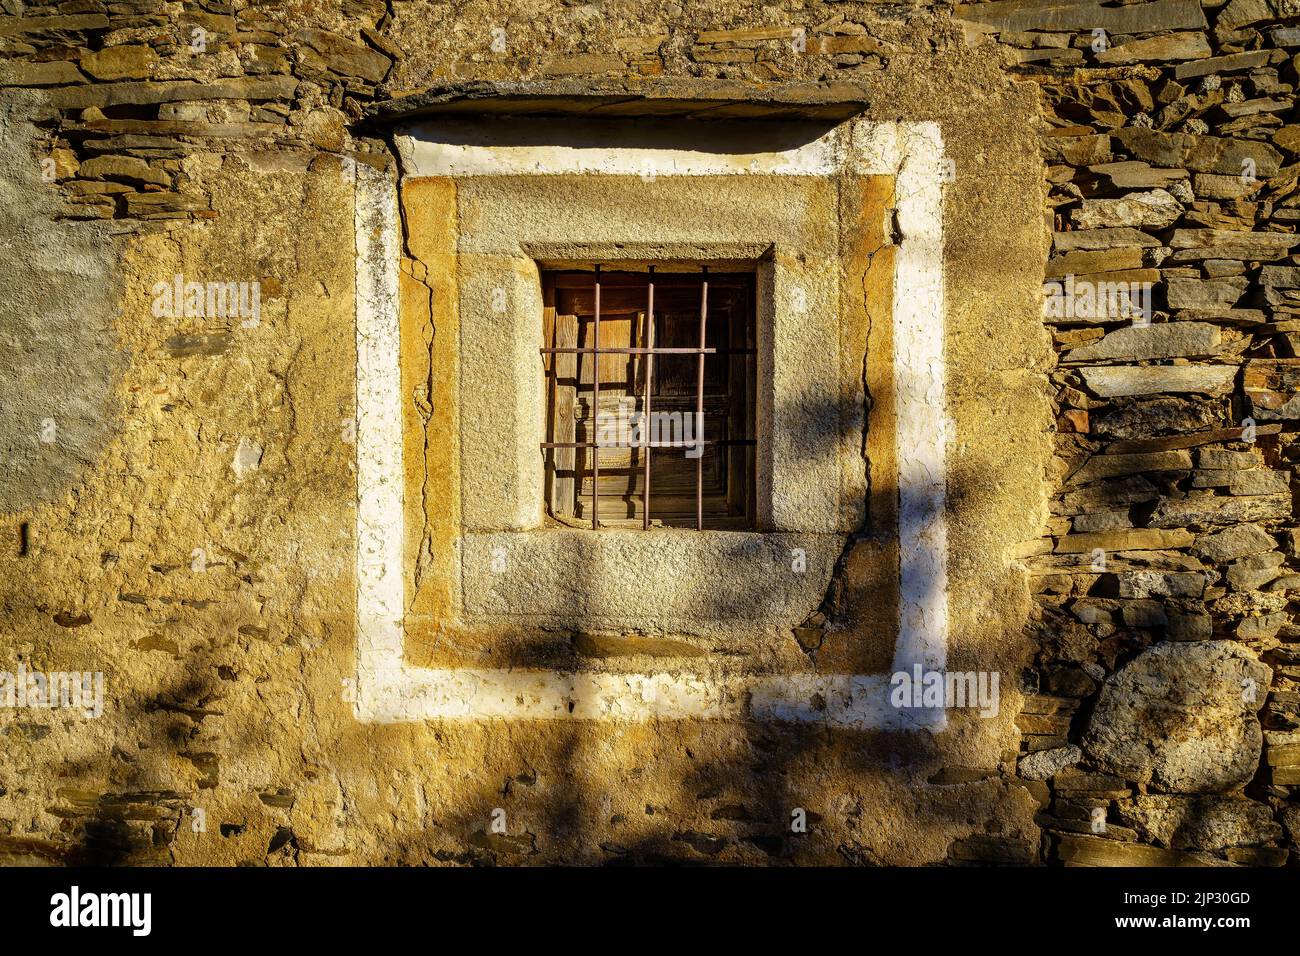 Old window in stone house on the sunny exterior. Spain. Stock Photo